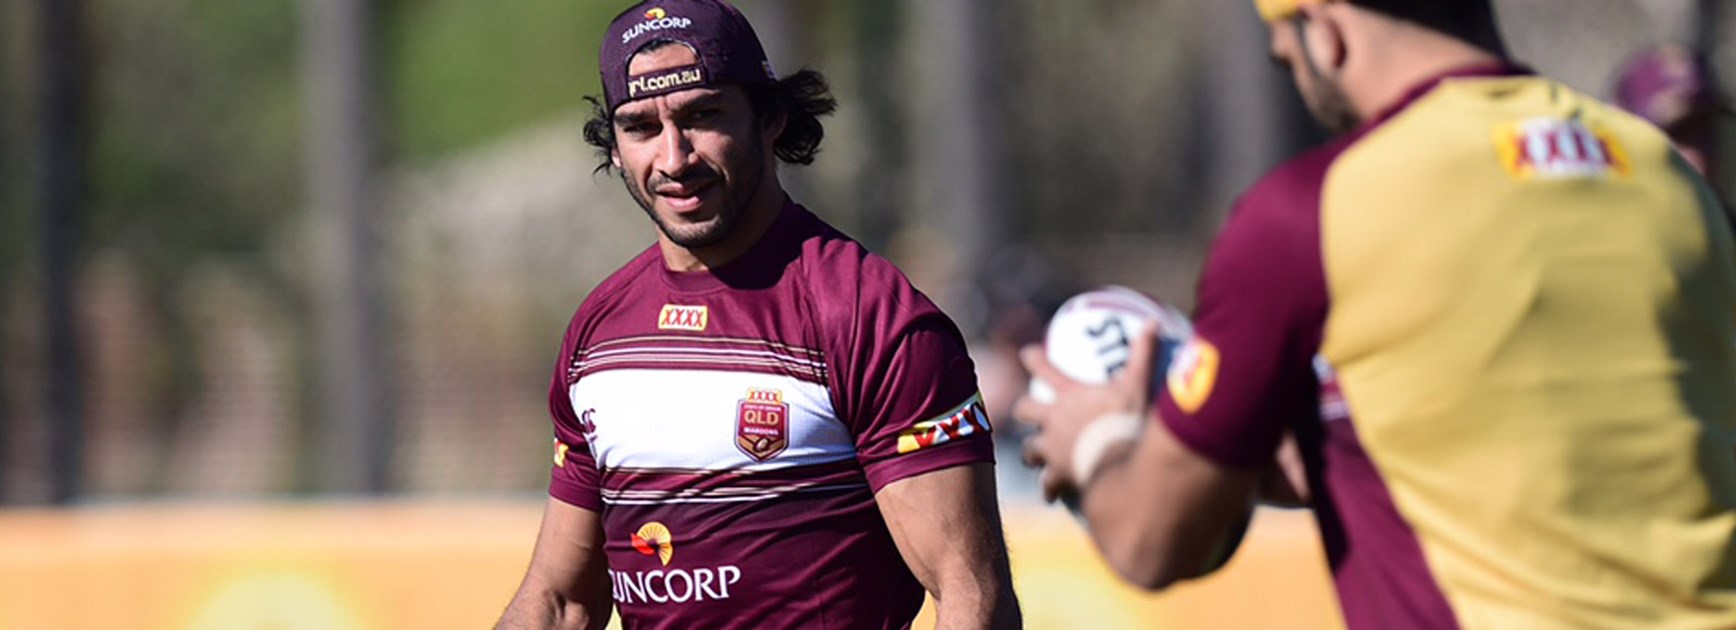 Maroons playmaker Johnathan Thurston in training with the Queensland team.